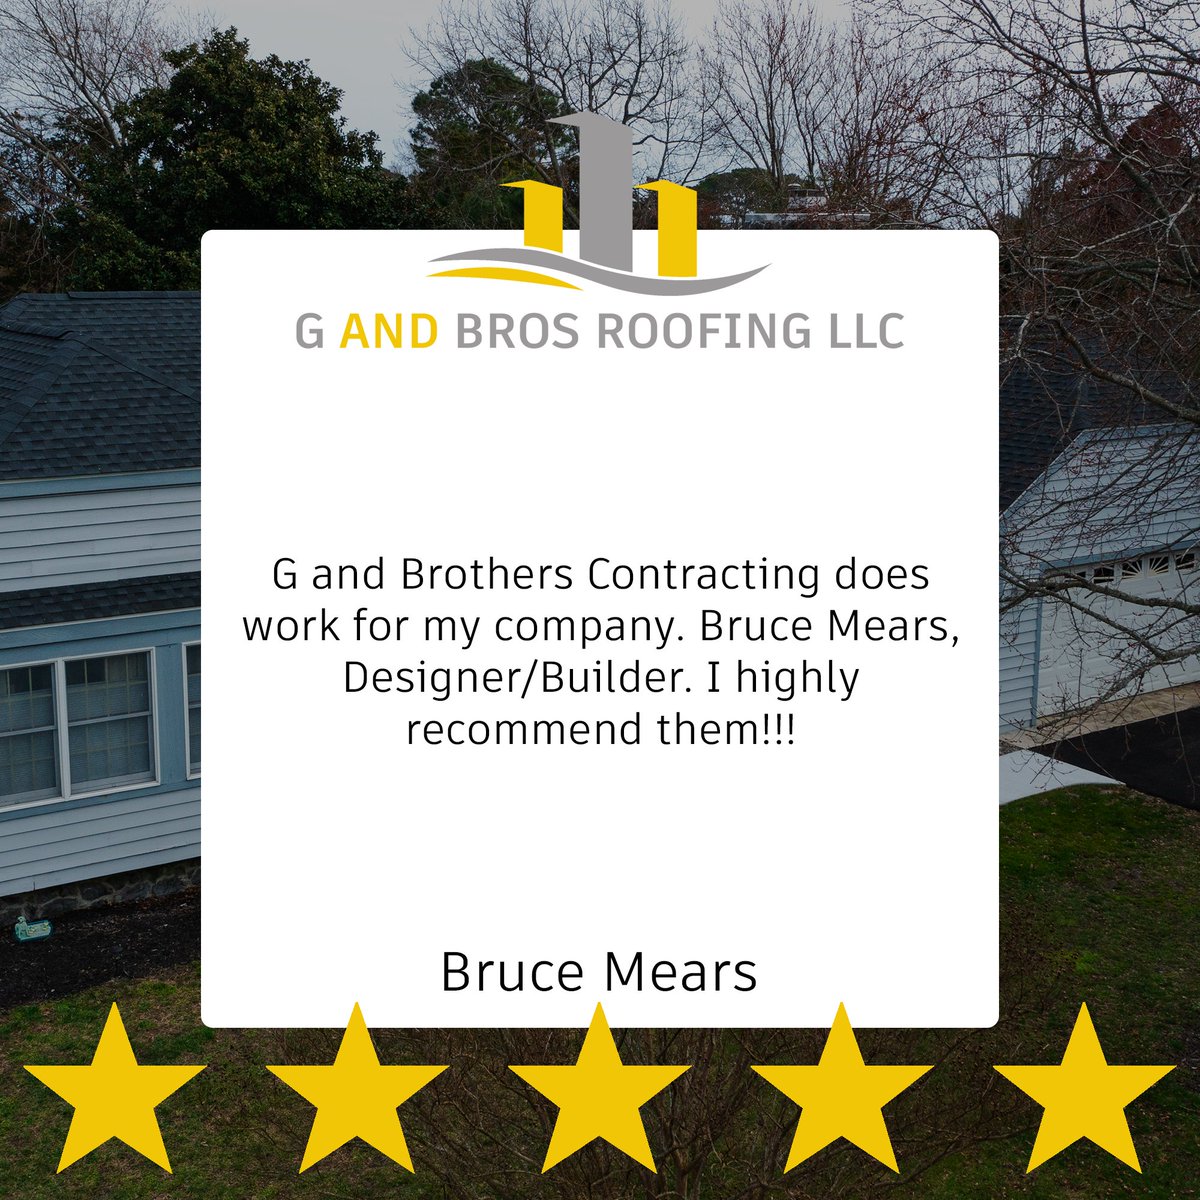 Thank you so much Bruce for leaving a review! We've always enjoyed working with you.

=====

#MarylandRoofing #roofing #roof #roofer #contractor #roofingcontractor #roofers #freeinspection #newroof #roofinglife #gutters #marylandroof #winddamage #stormdamage #insuranceclaims